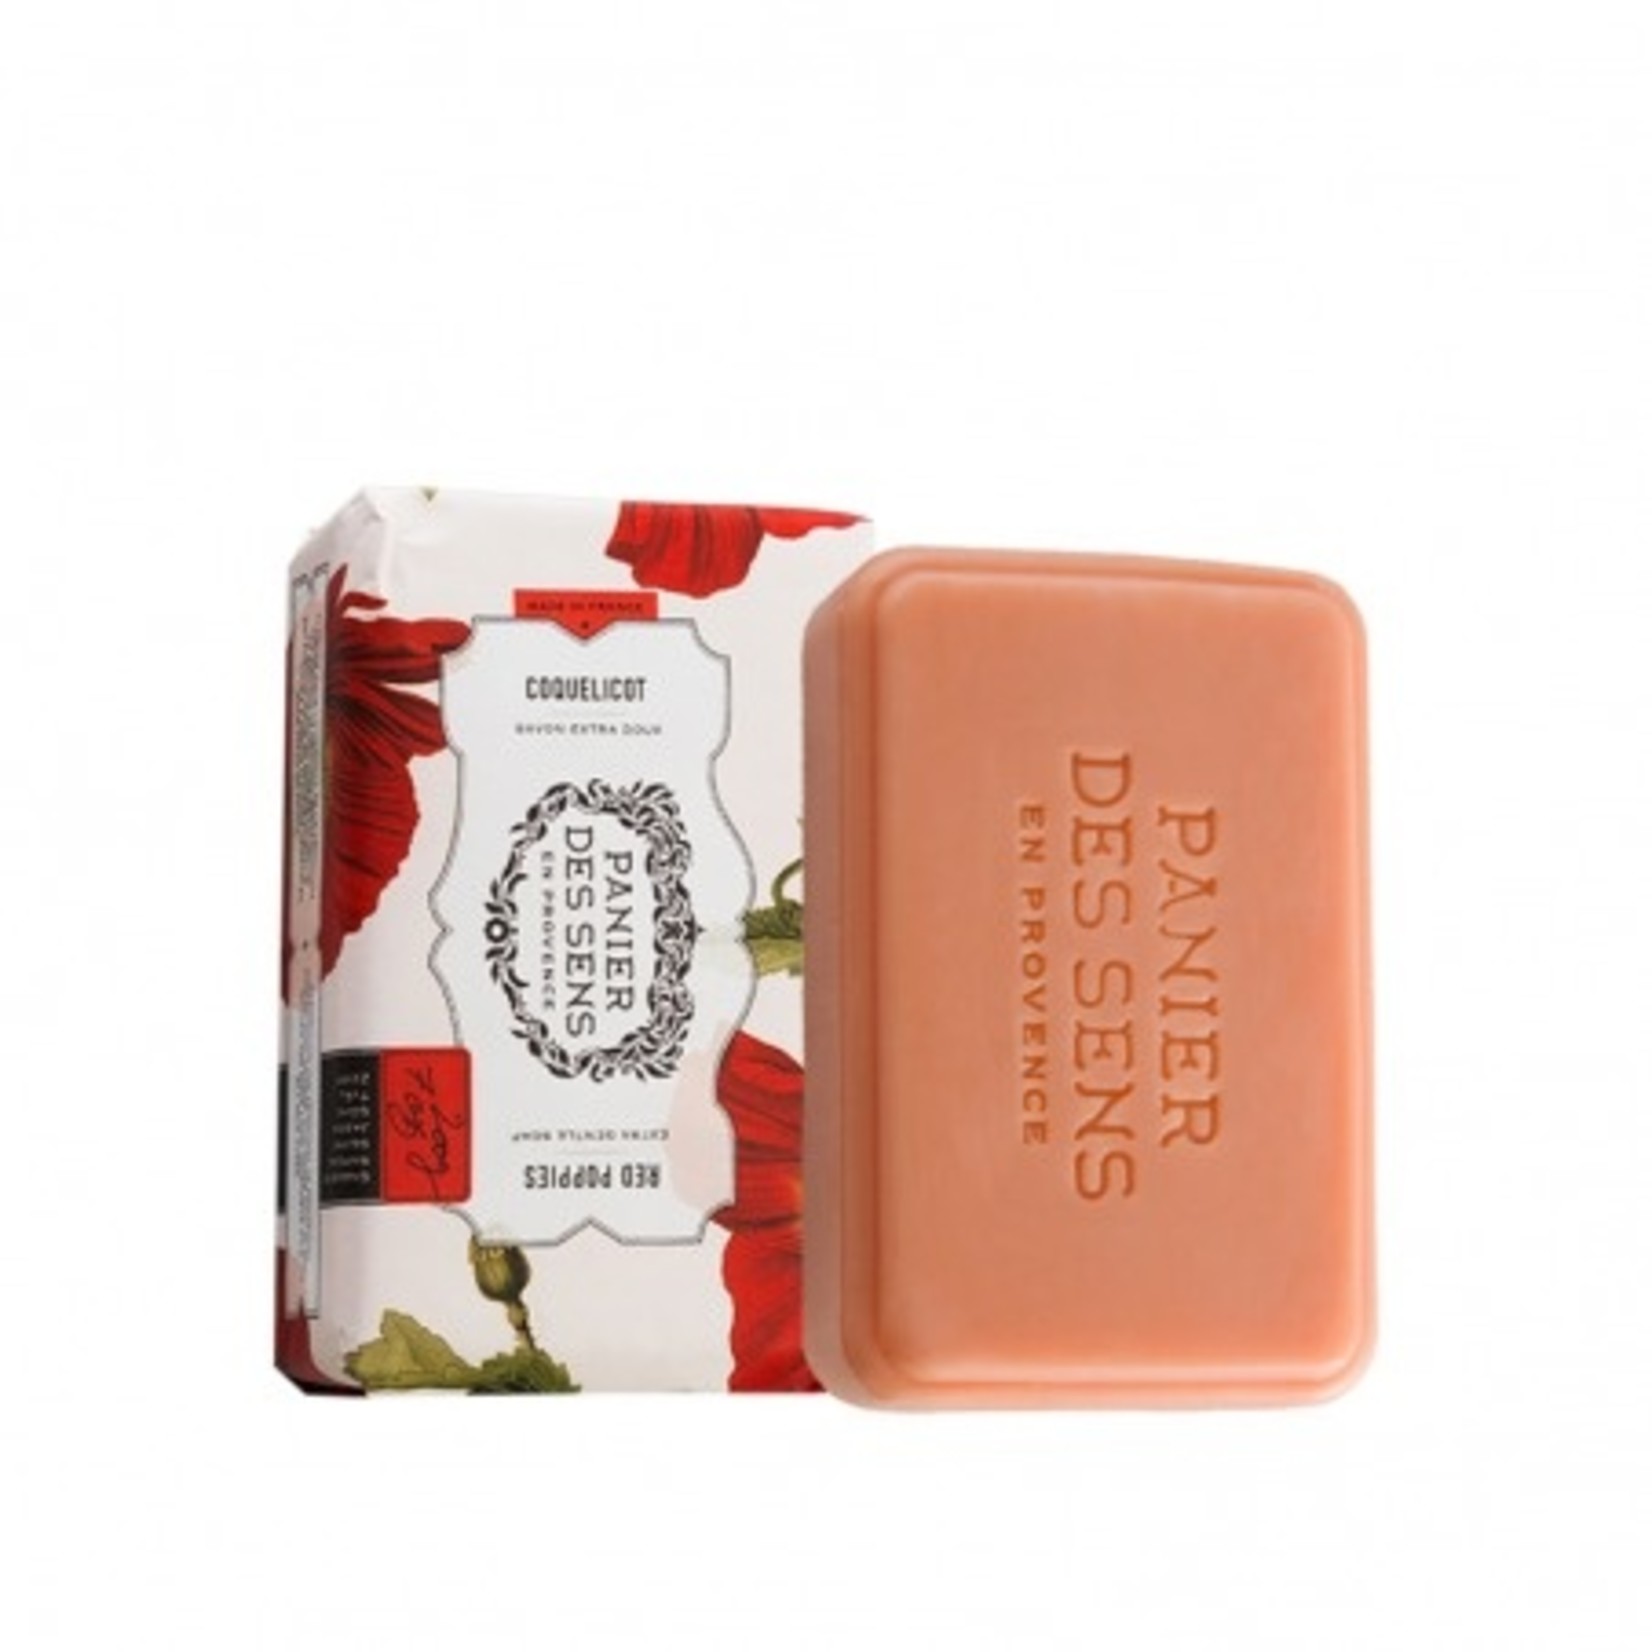 Panier des Sens Extra Gentle Soap (Sheabutter)  - Red Poppies